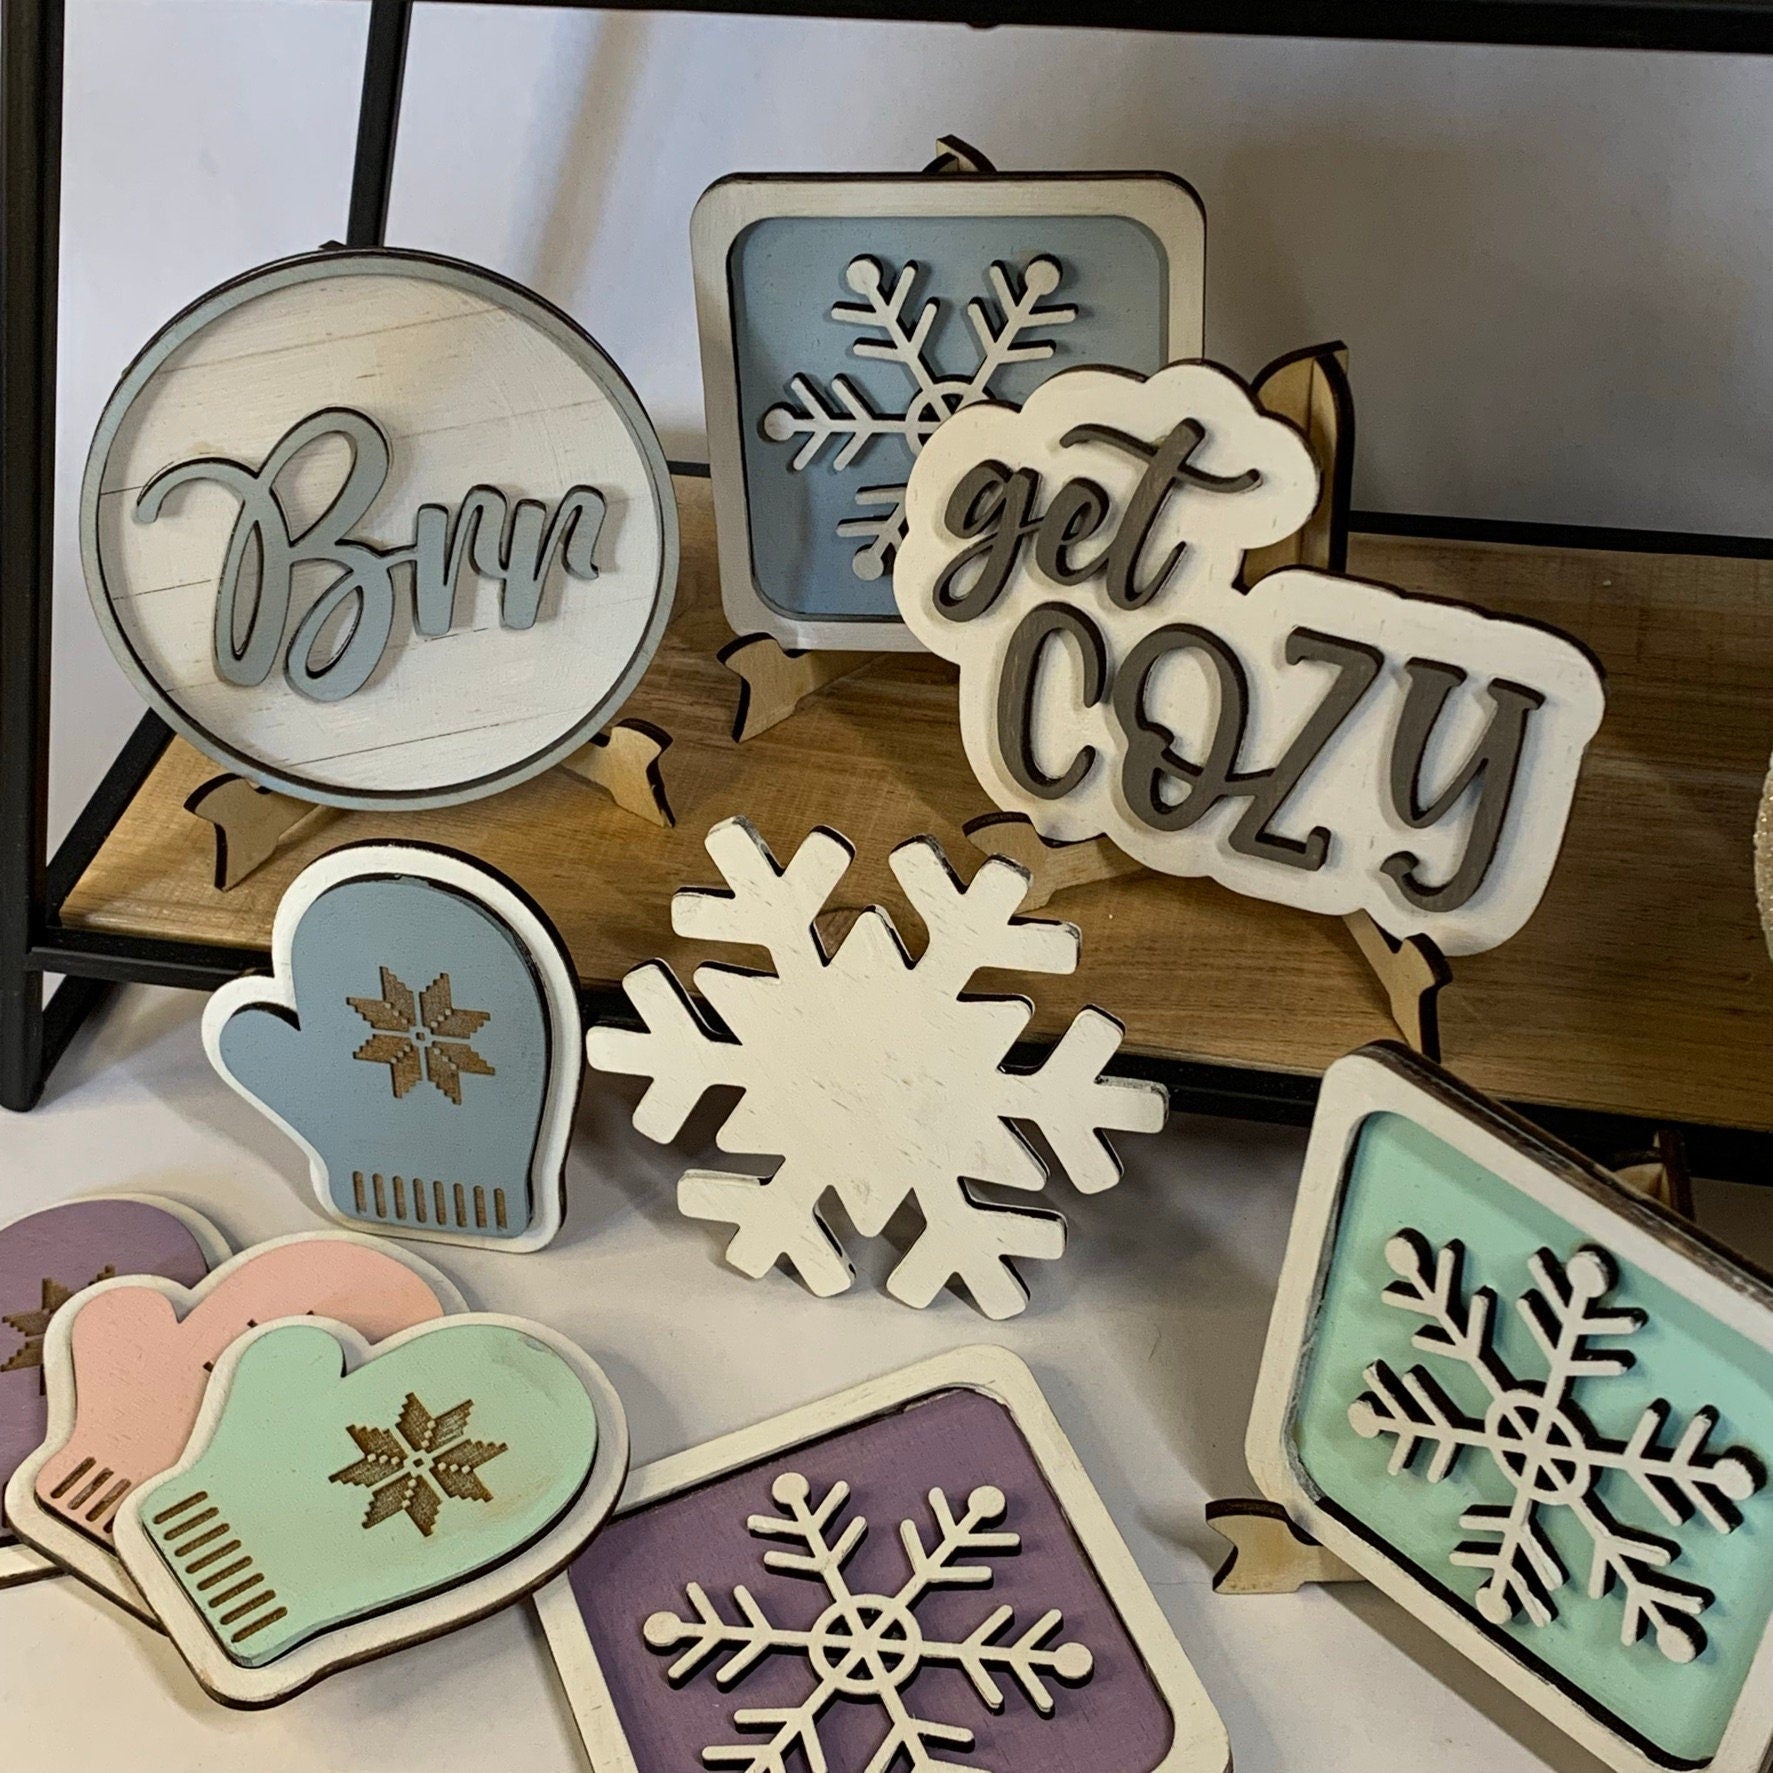 Snowflake and Snowman Winter Tiered Tray Decor - Laser Cut Wood Painted, Custom Painted or Pastel Colors